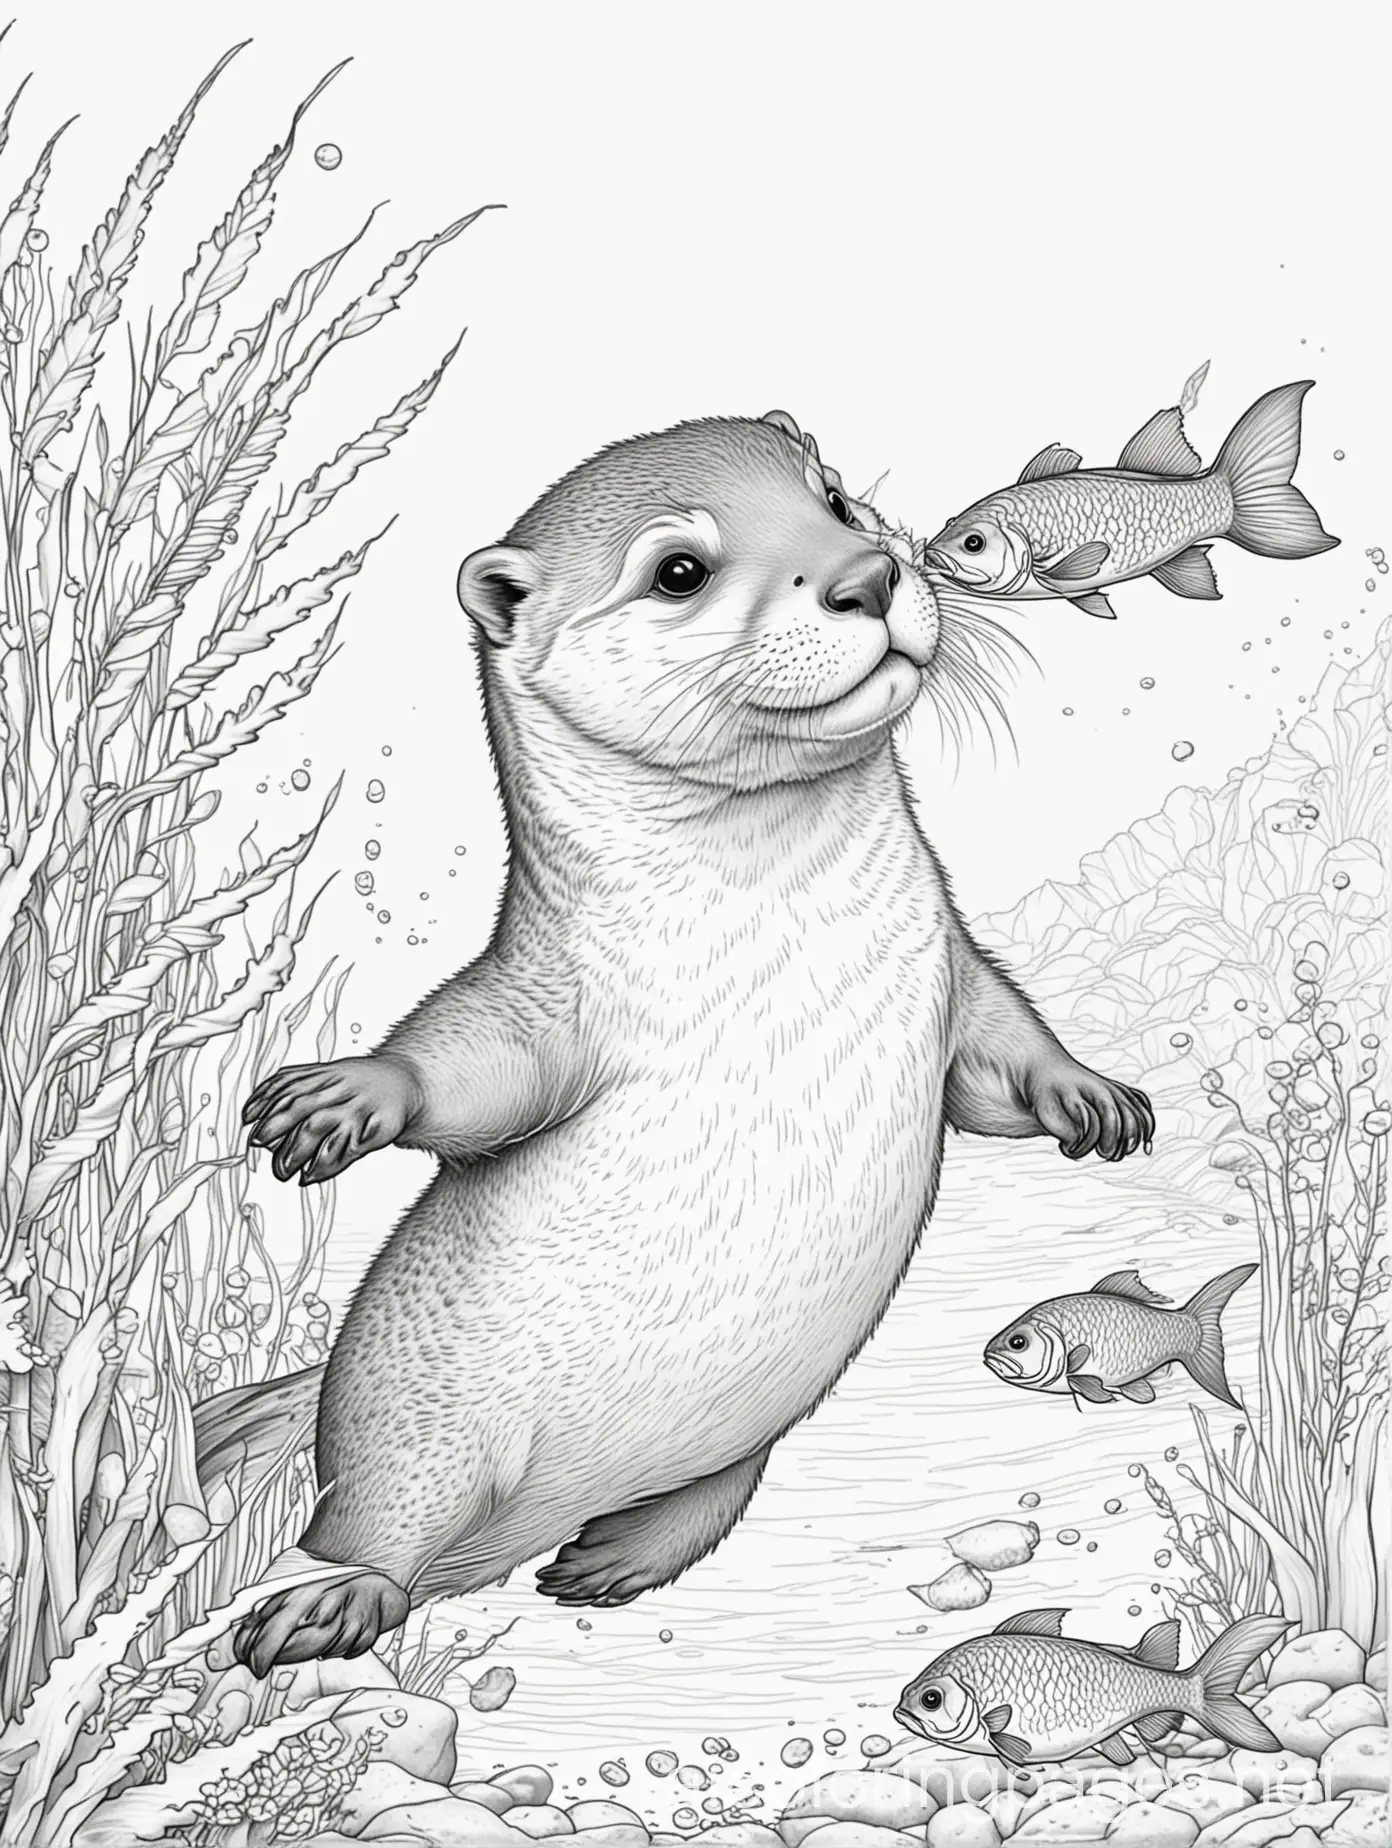 Young Otter diving with fish, Coloring Page, black and white, line art, white background, Simplicity, Ample White Space. The background of the coloring page is plain white to make it easy for young children to color within the lines. The outlines of all the subjects are easy to distinguish, making it simple for kids to color without too much difficulty